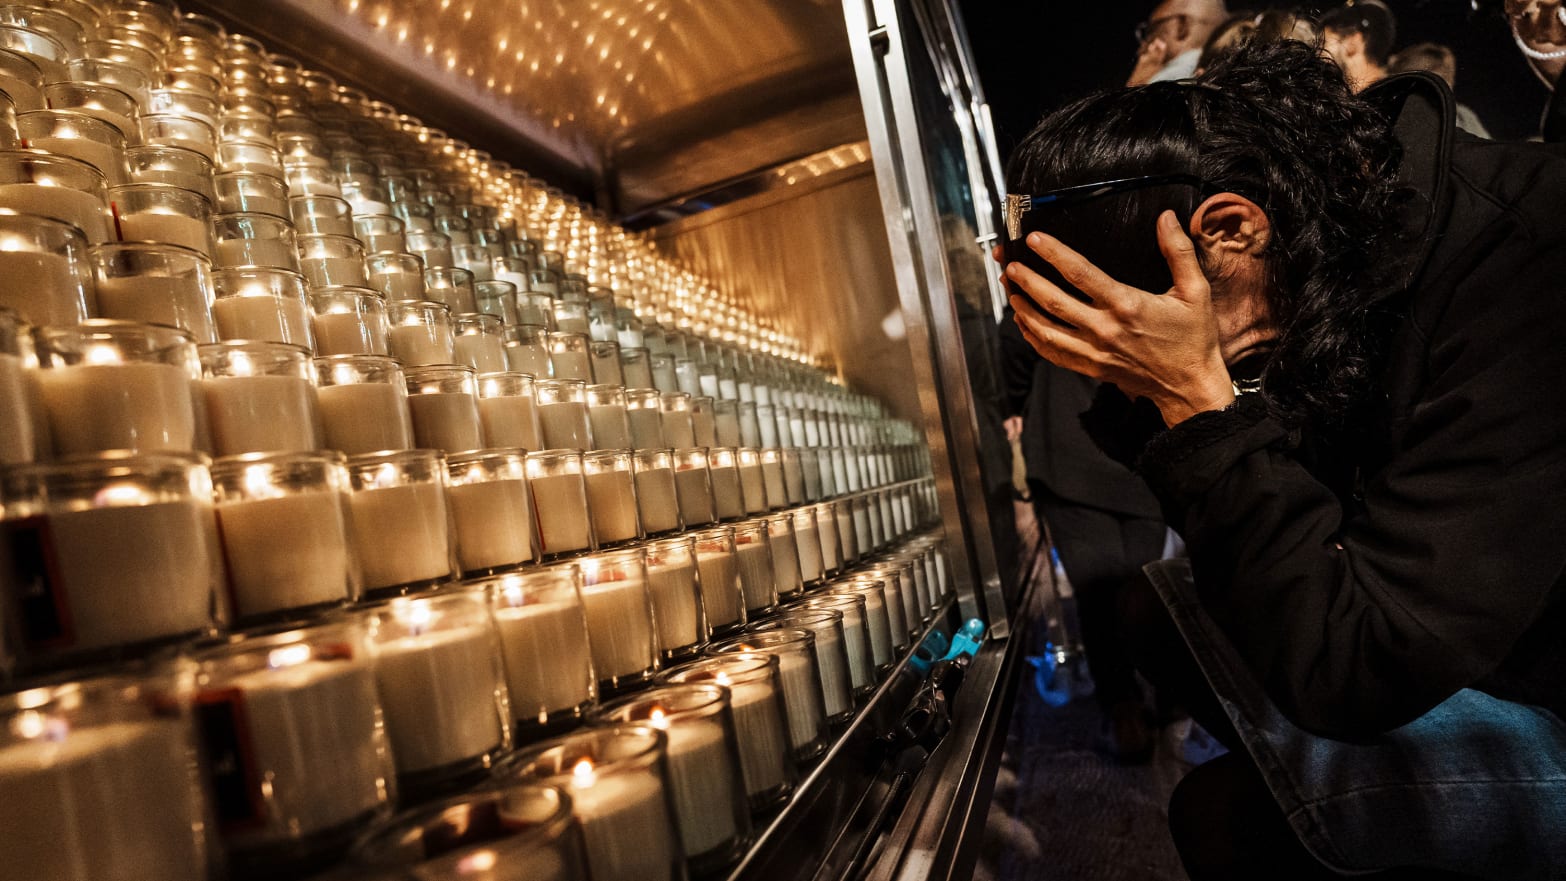 A picture of a woman weeps in her hands in front of rows of candles.